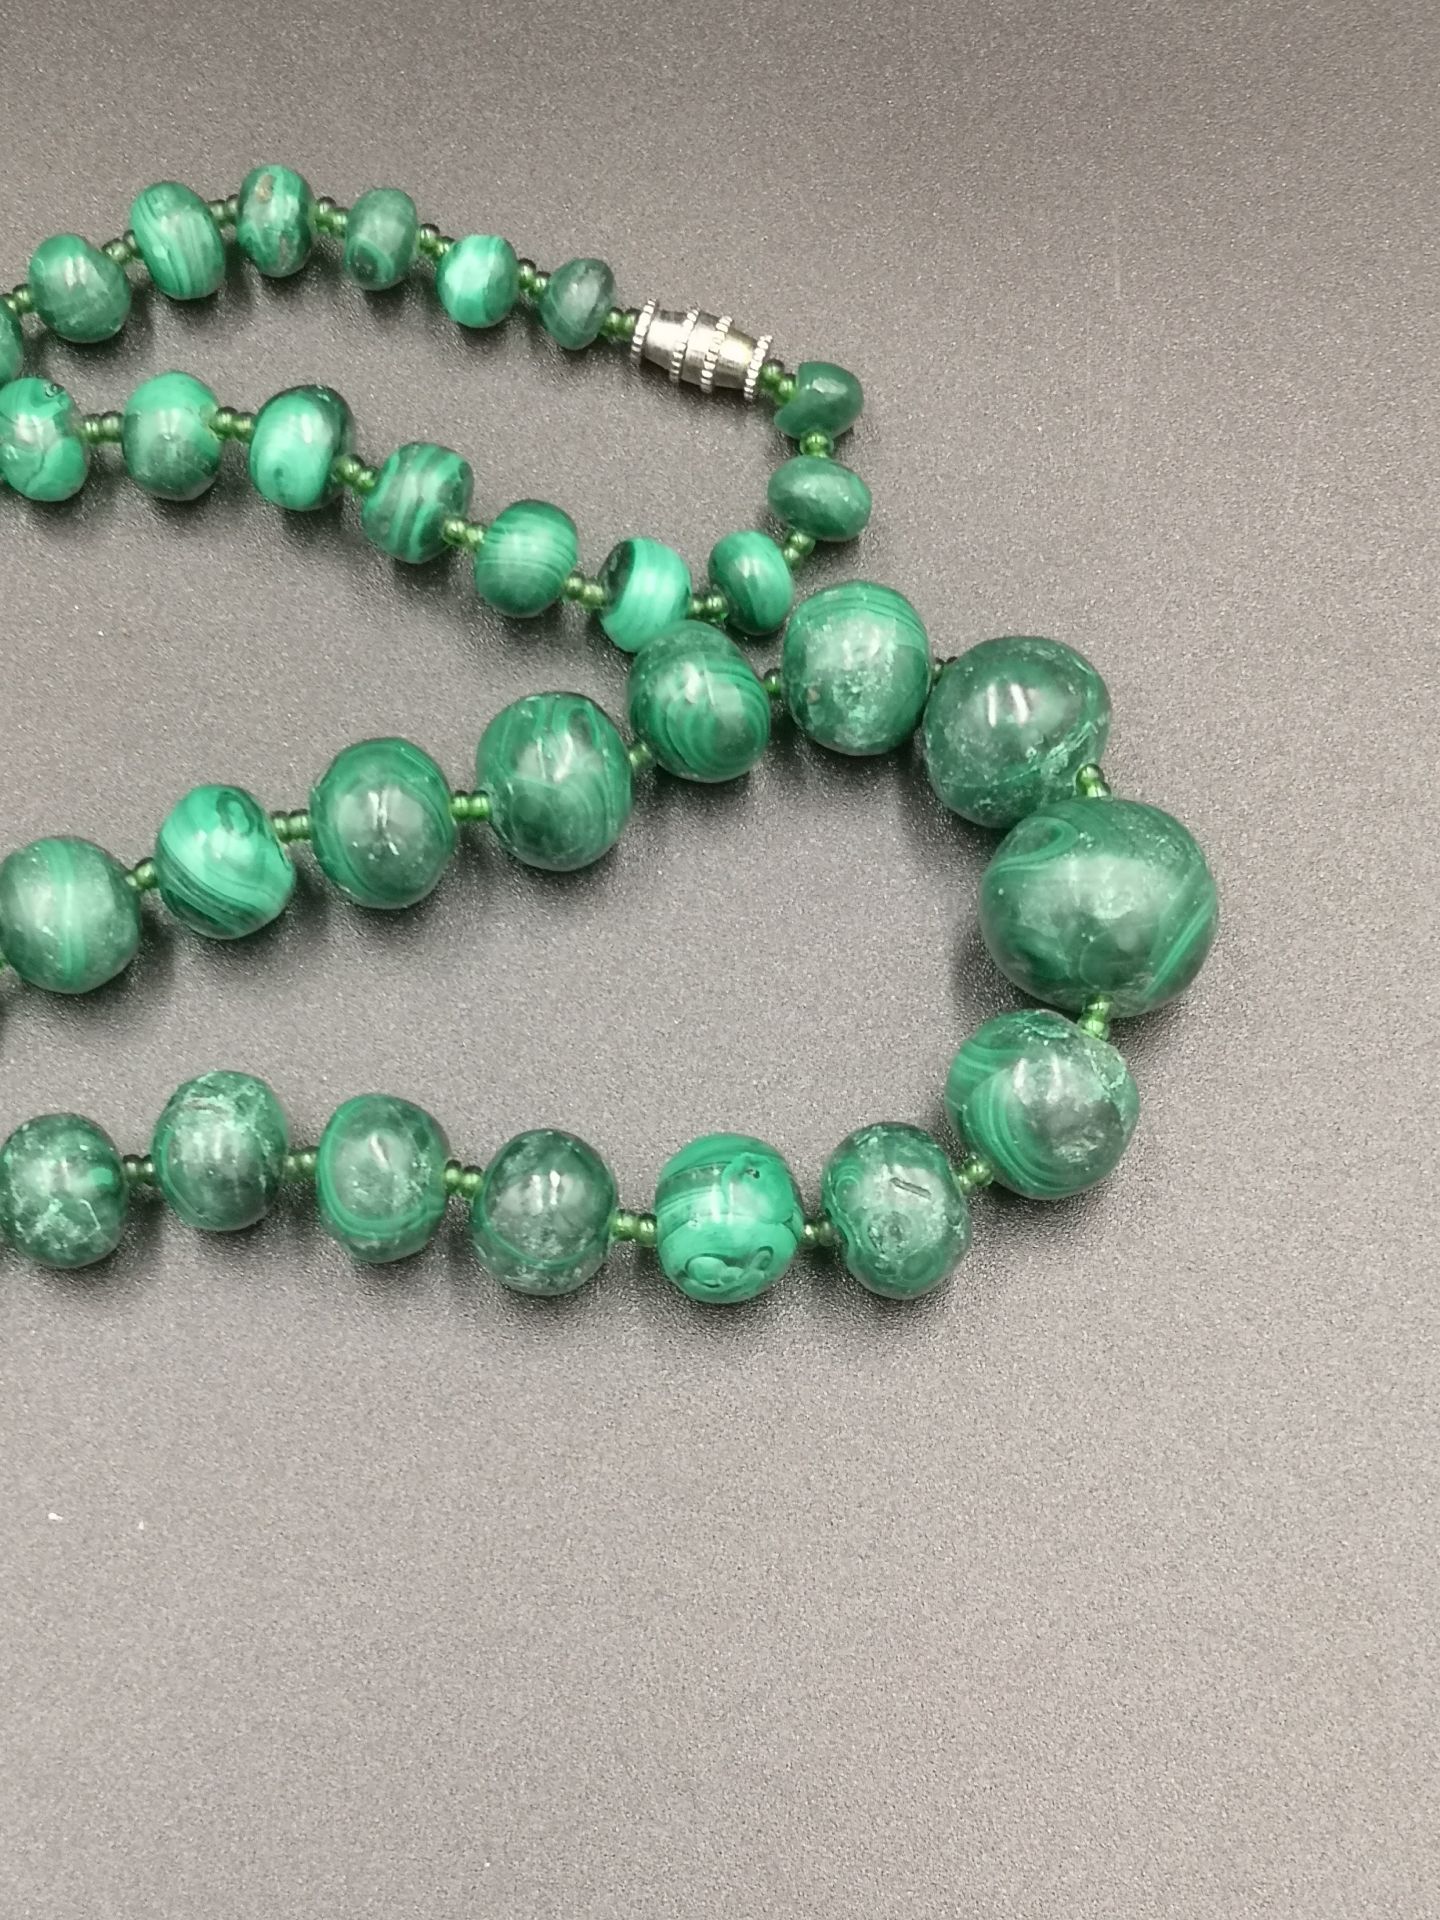 Malachite necklace together with an onyx necklace - Image 5 of 6